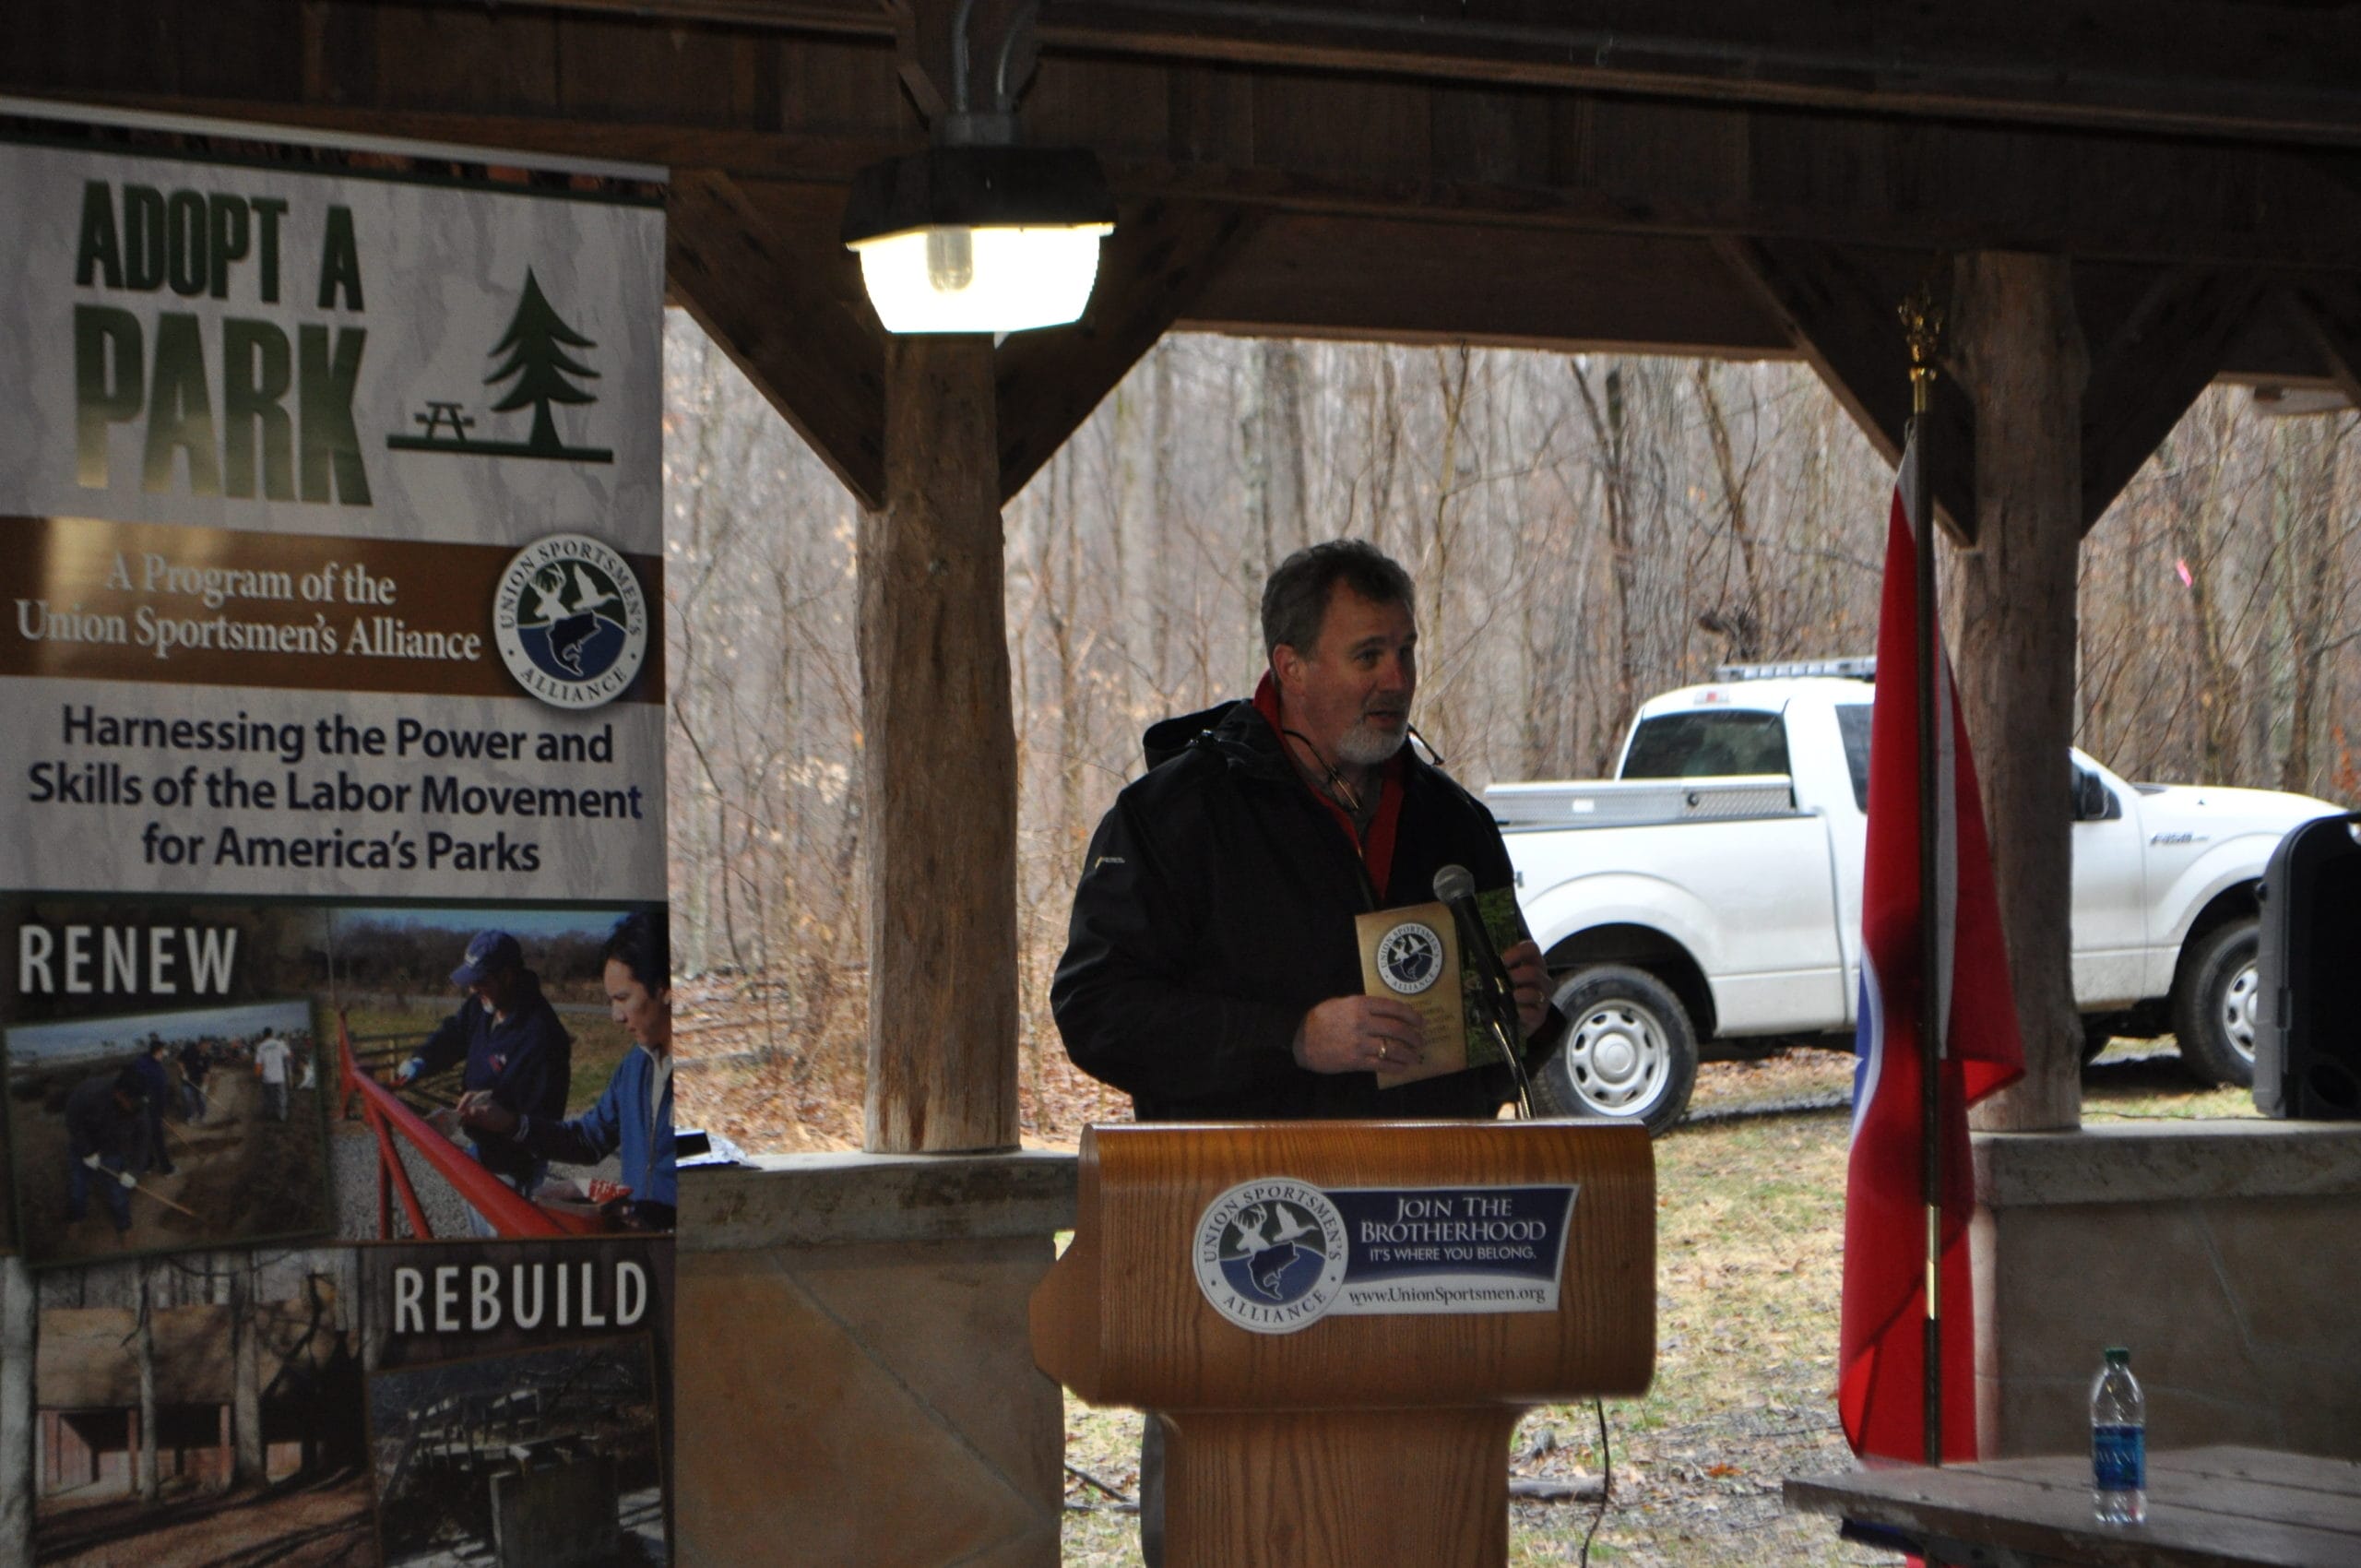 Fred Myers, Executive Director and CEO of the Union Sportsmen's Alliance, thanked everyone who made the bridge re-build a reality - and discussed the unmatched, unique value union tradesmen and women offer their communities.